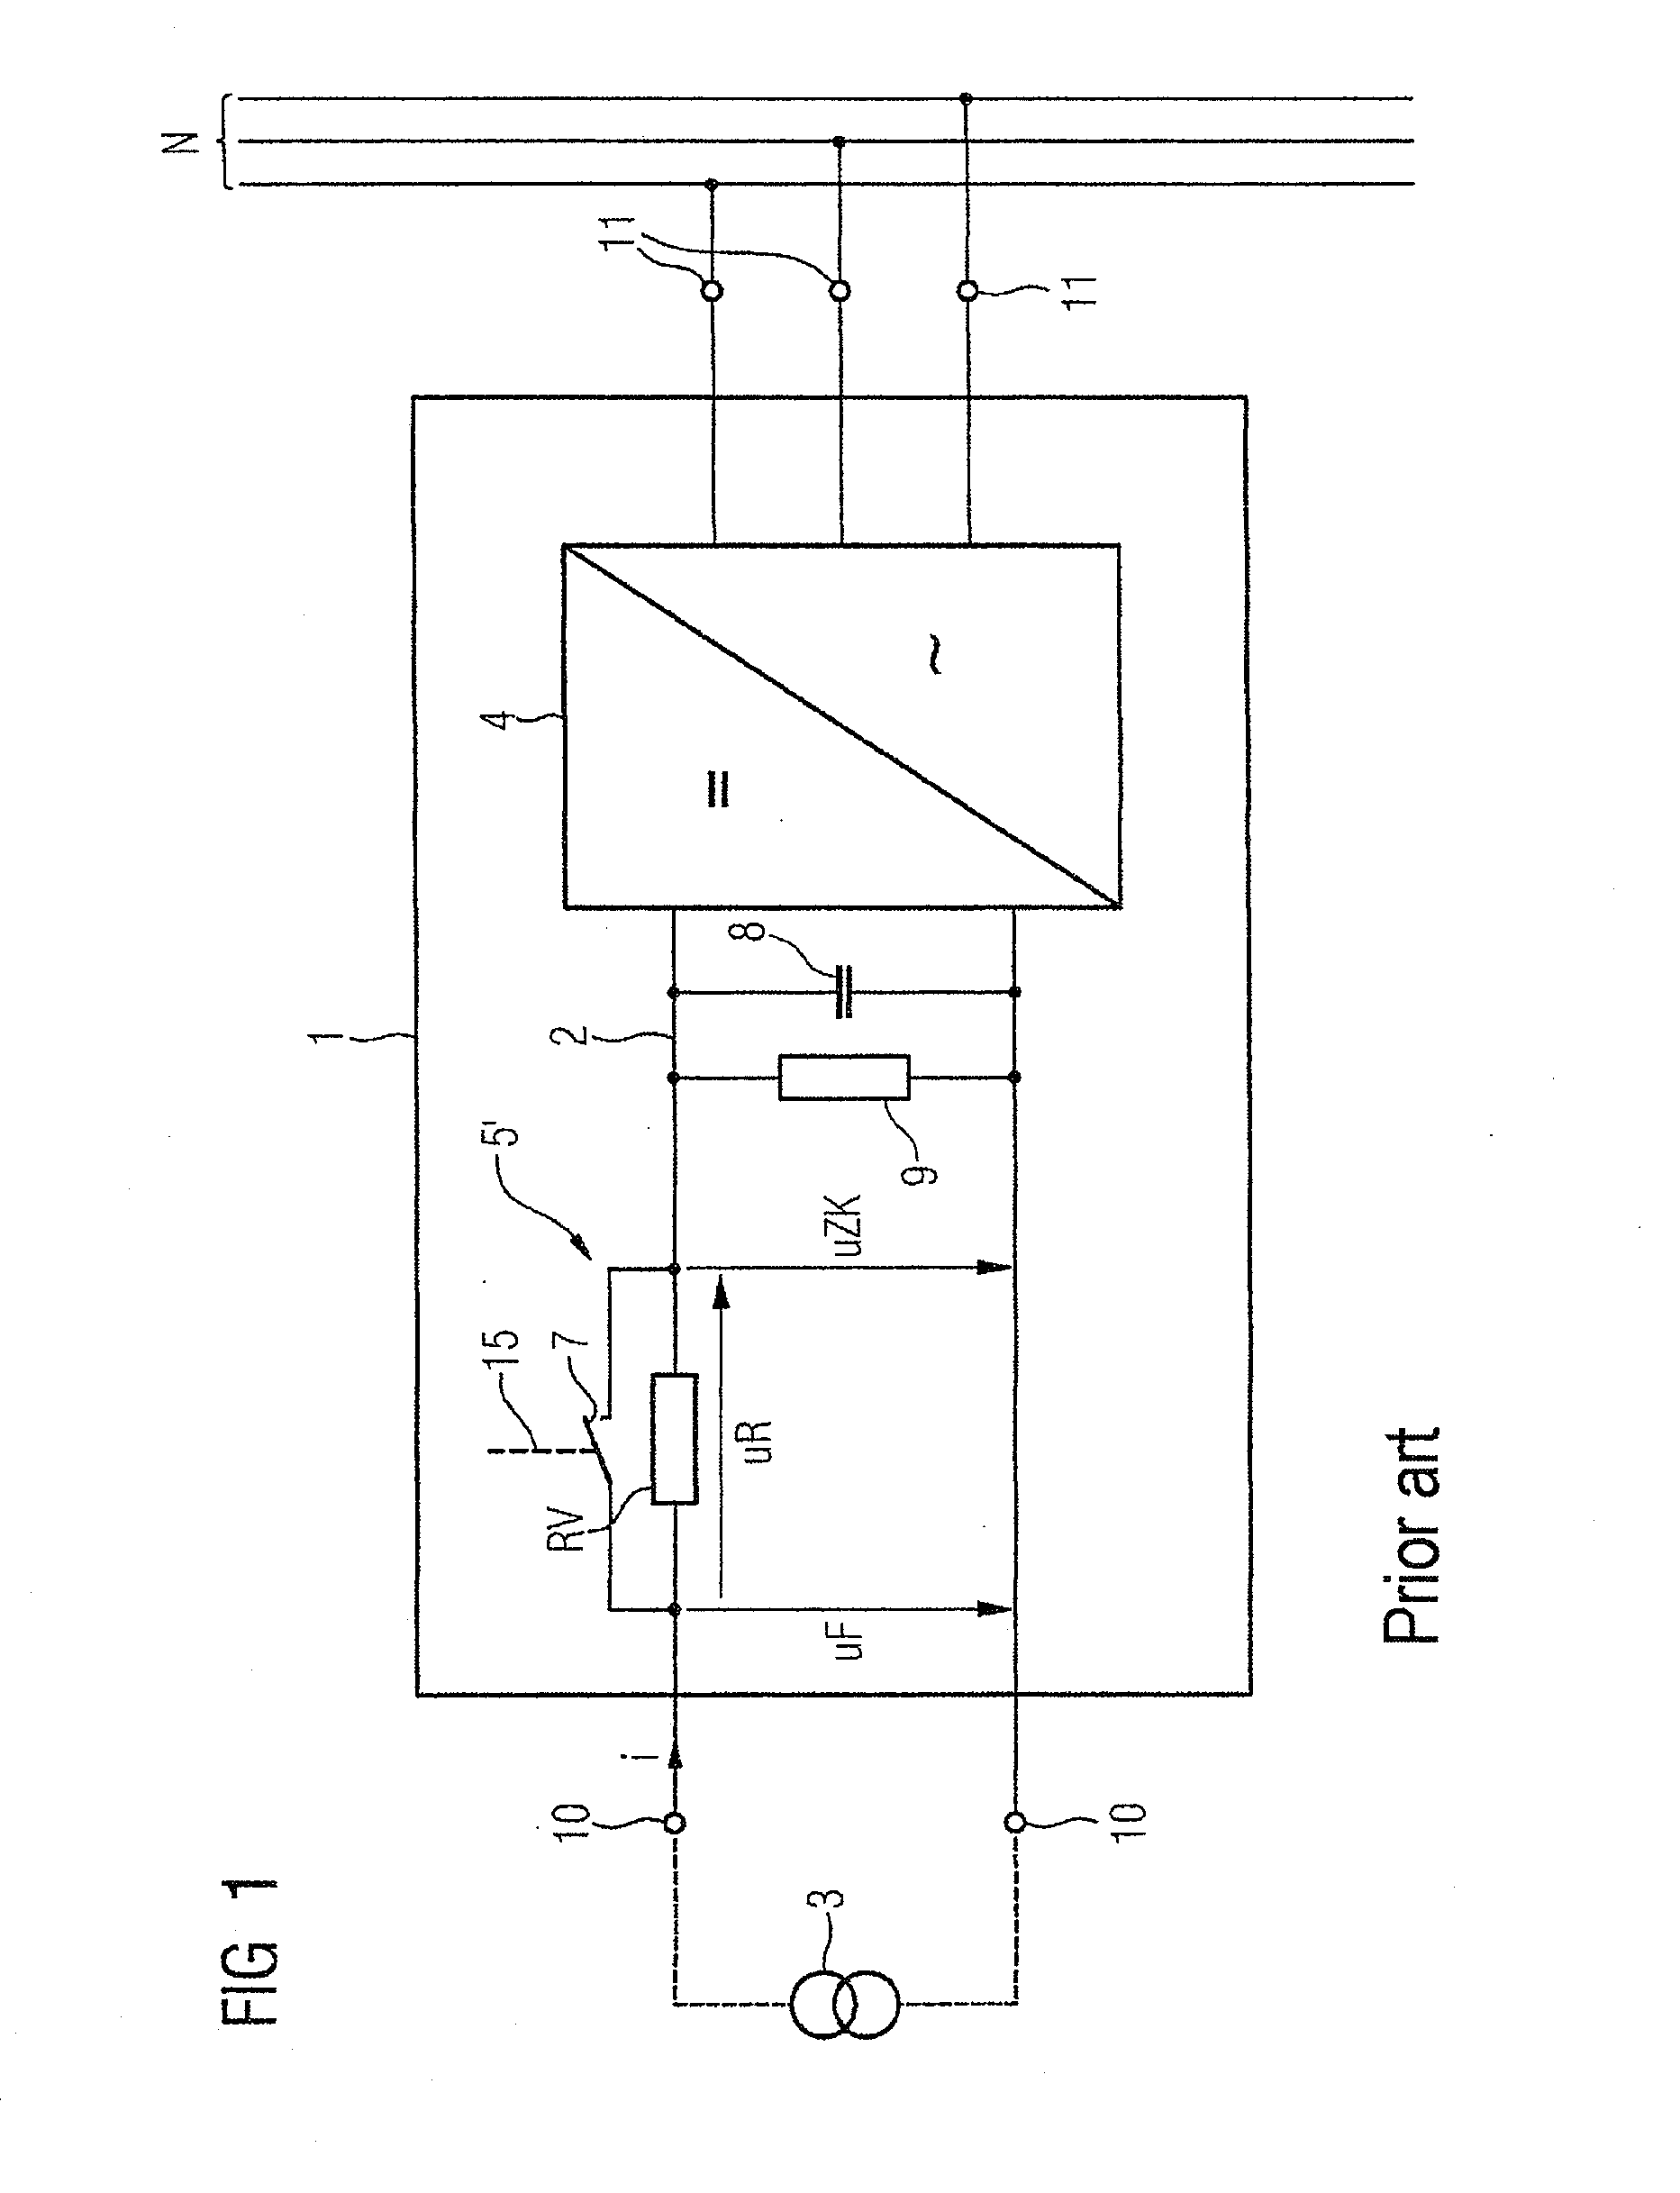 Protection Circuit for Protecting an Intermediate Circuit of a Solar Inverter Against Overvoltages